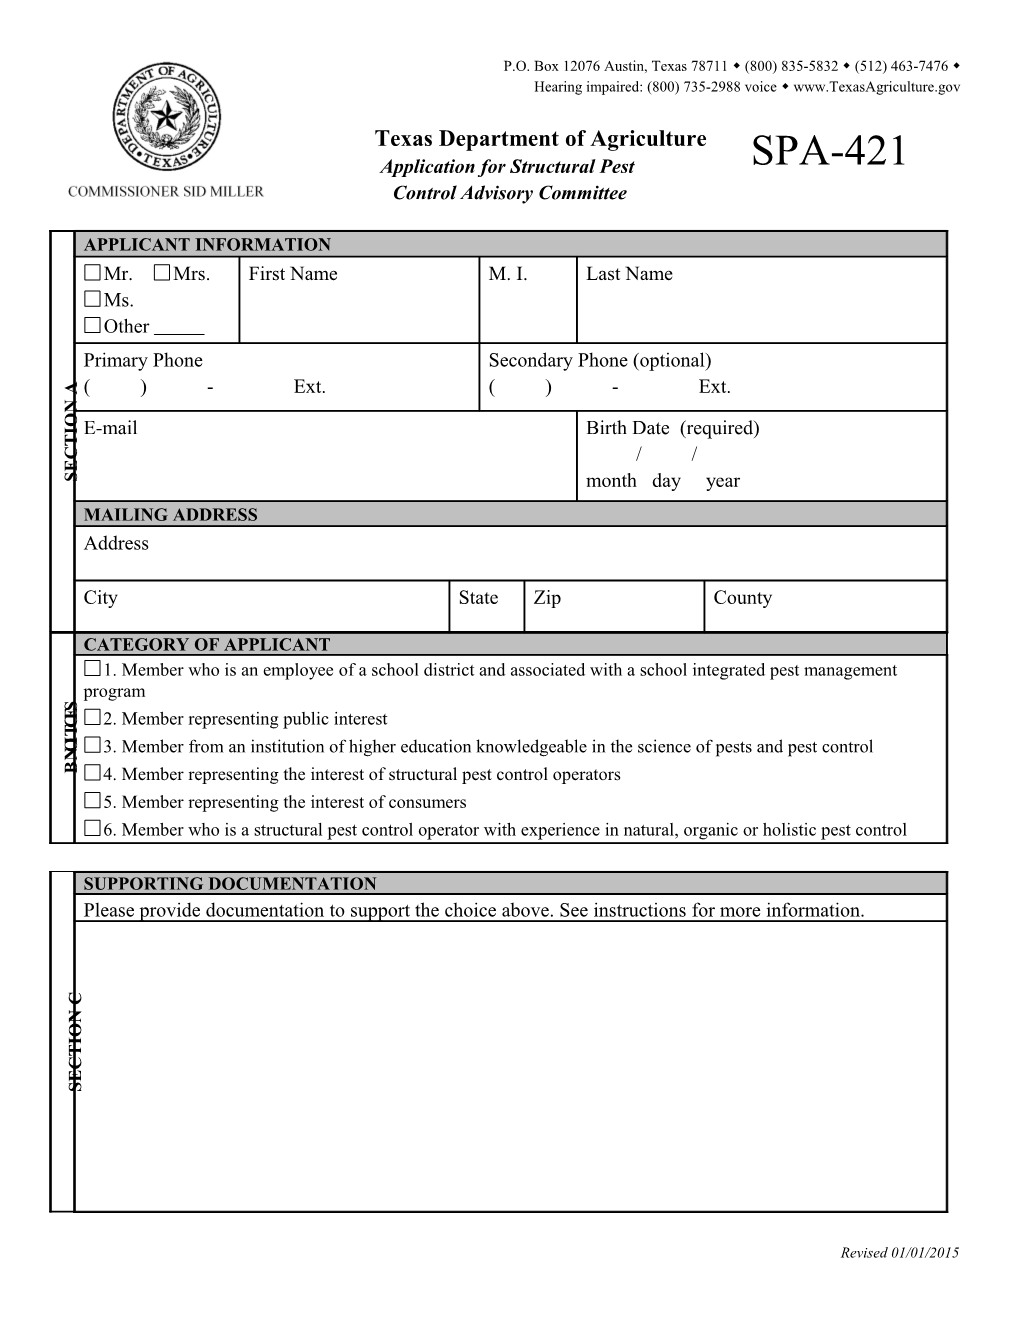 Application for Structural Pest Control Advisory Committeepage 2 of 2